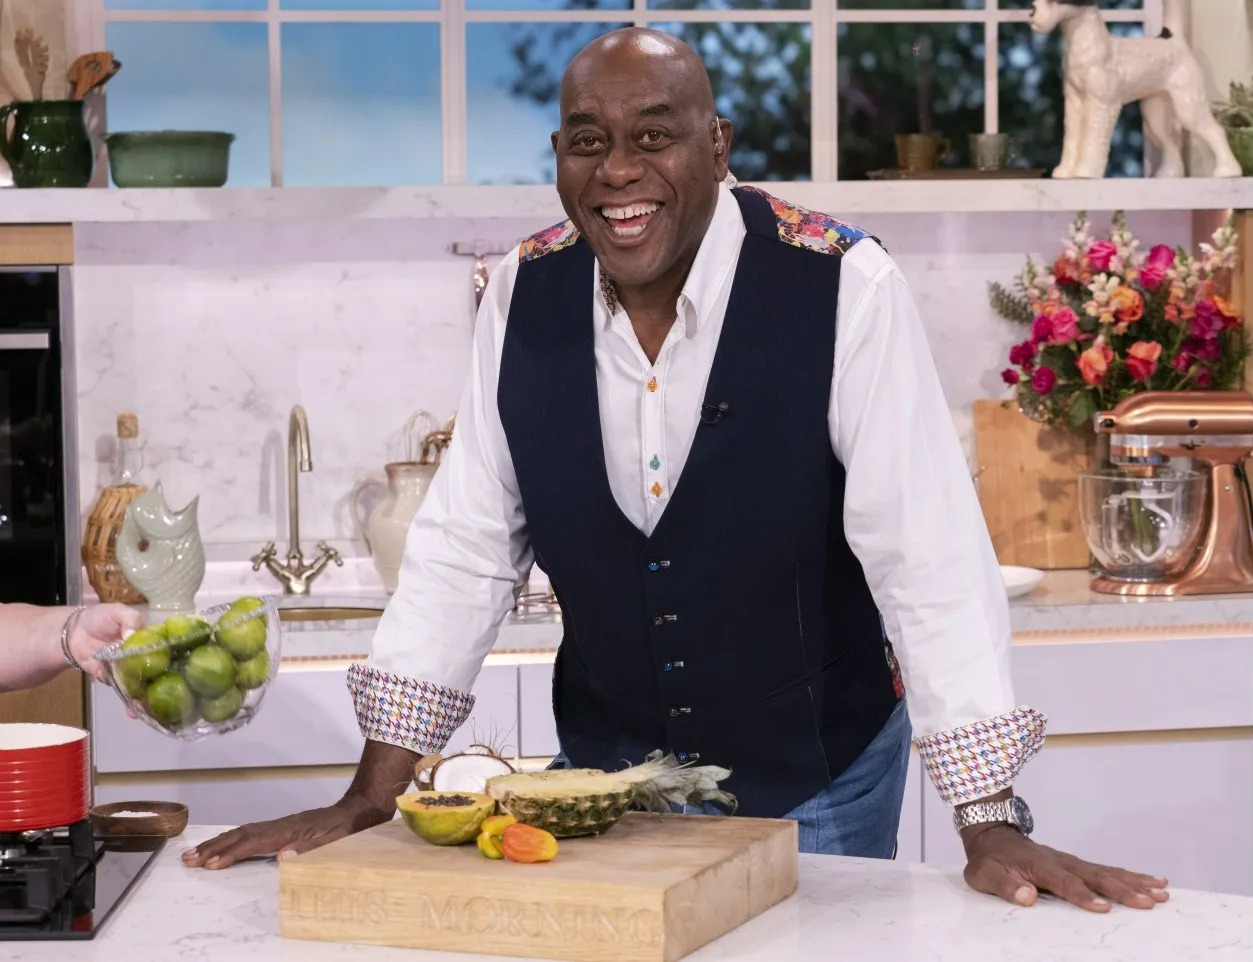 Ainsley Harriott reveals 'national treasure' status led to split from wife of 23 years